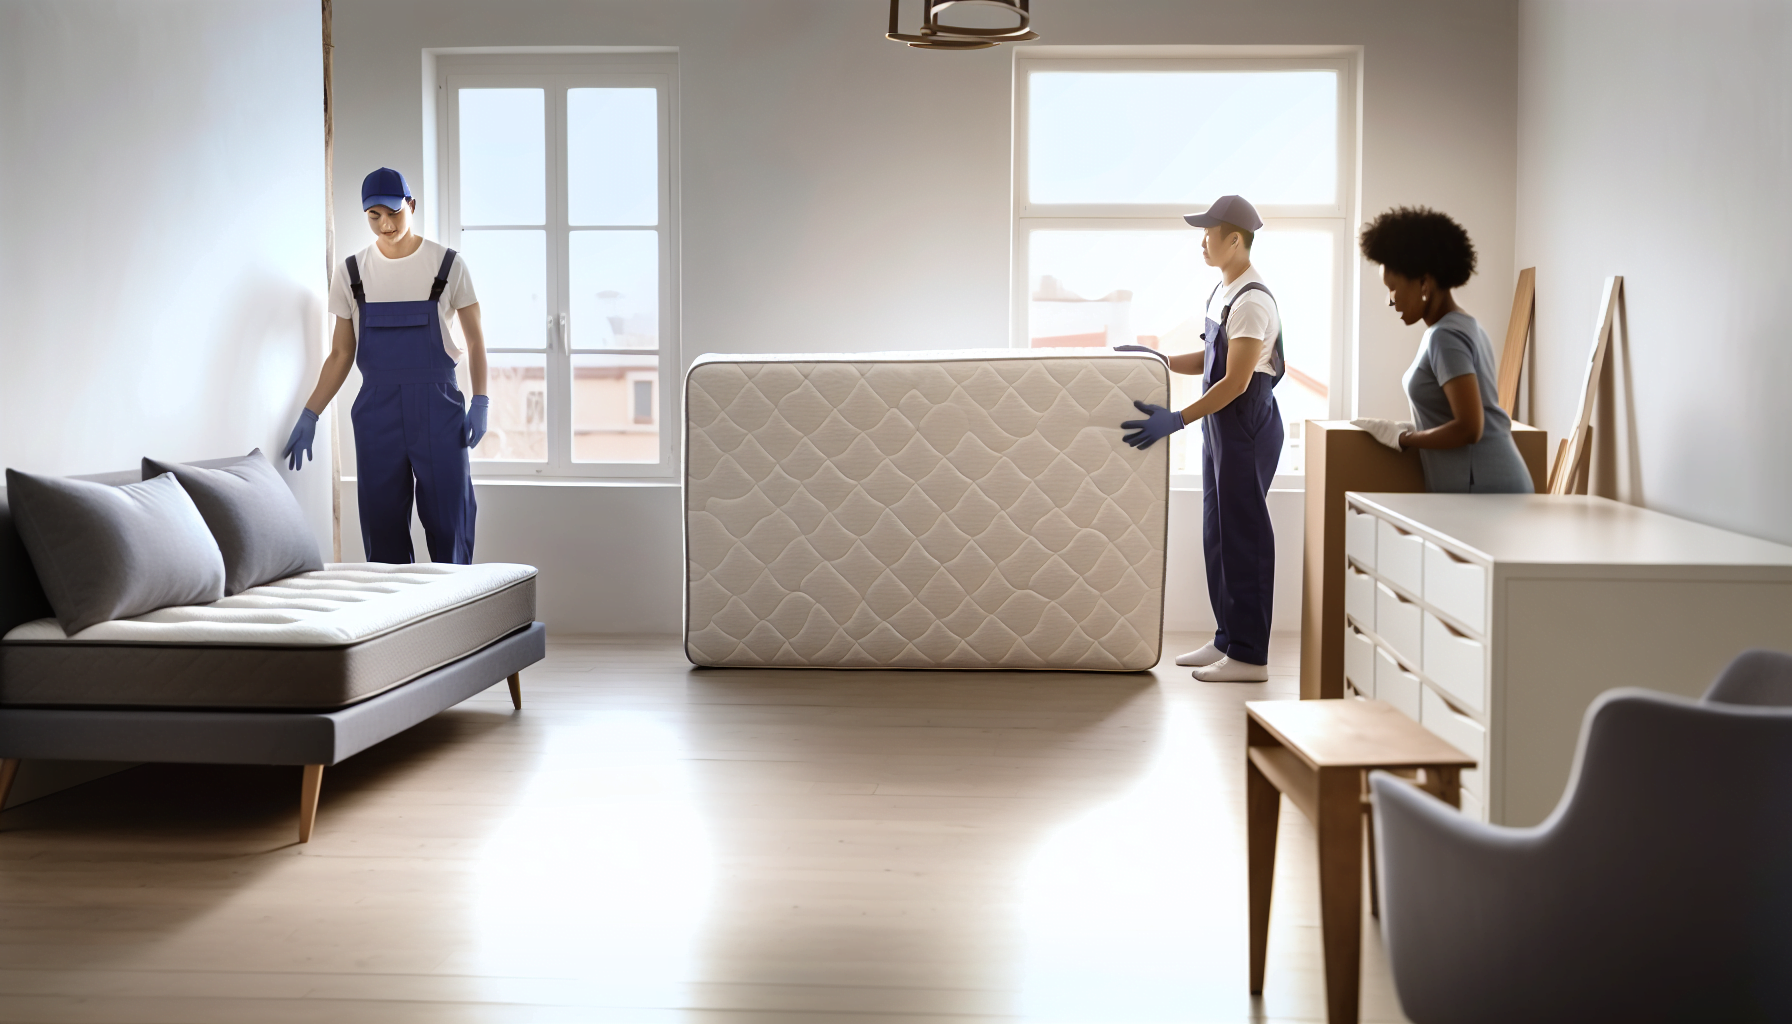 Professional mattress delivery and setup service